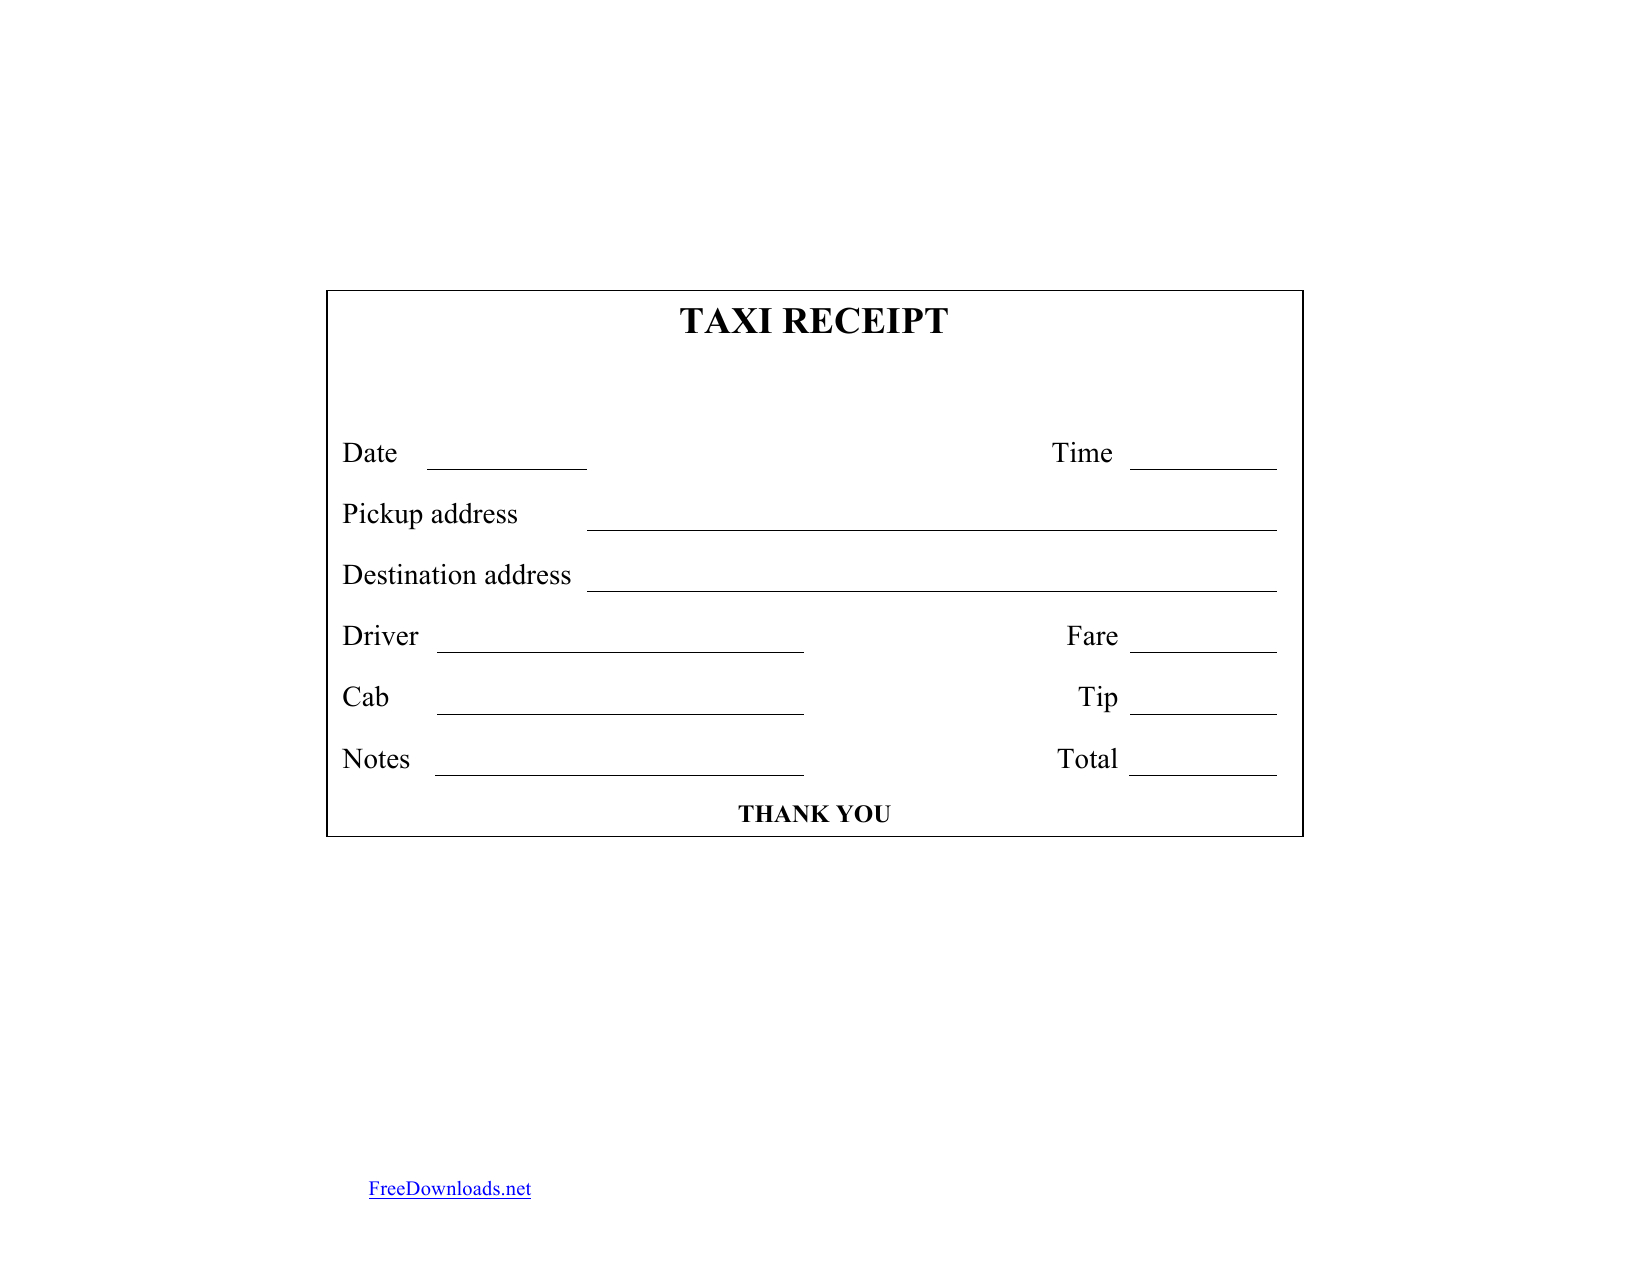 Taxi Cab Receipts Printable - Tutlin.psstech.co - Www Hooverwebdesign Com Free Printables Printable Receipts